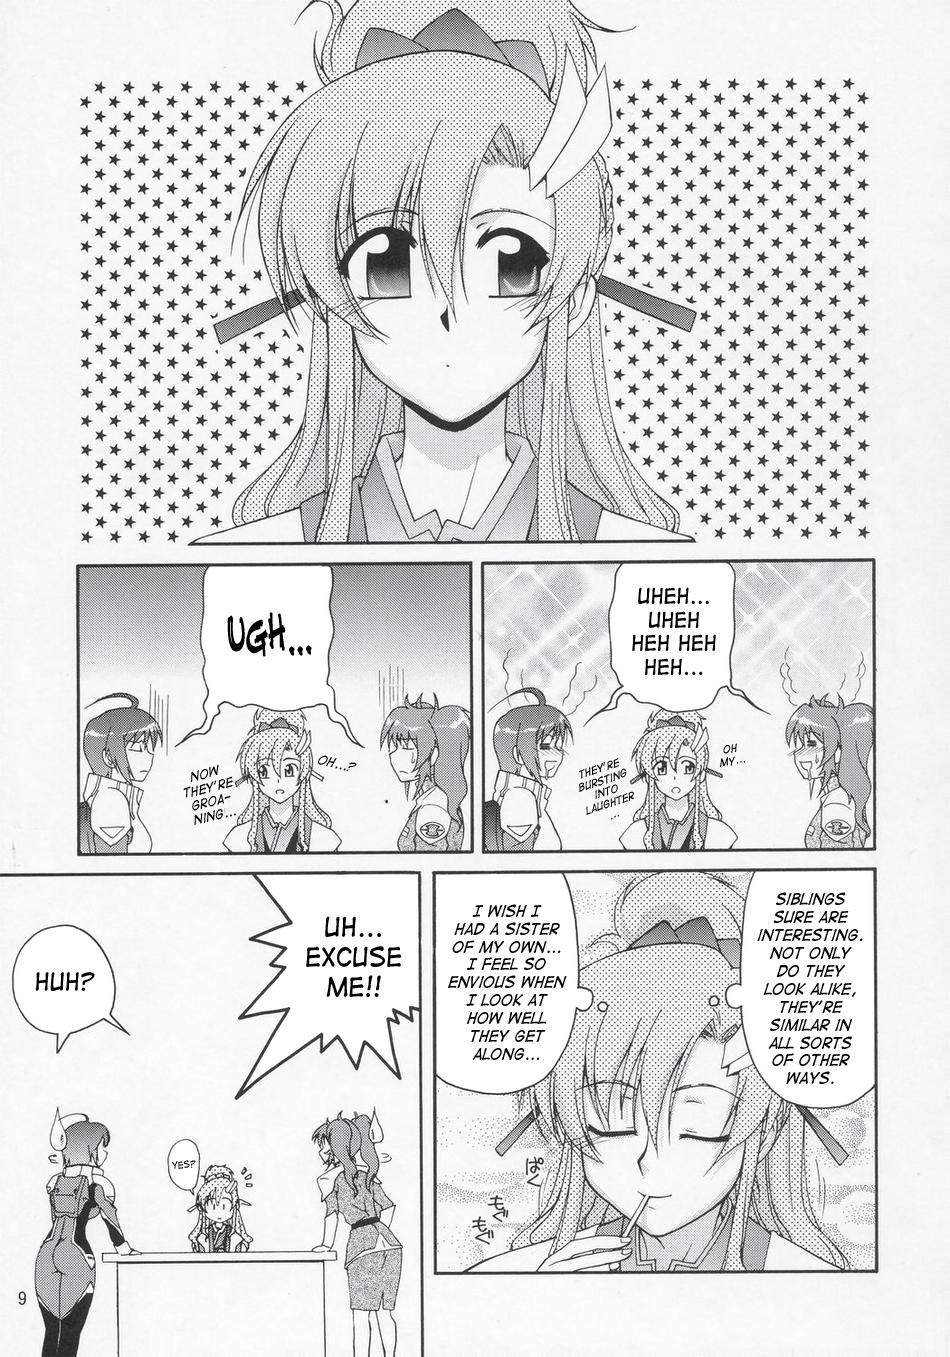 Women Thank You! Lacus End - Gundam seed destiny Animation - Page 8